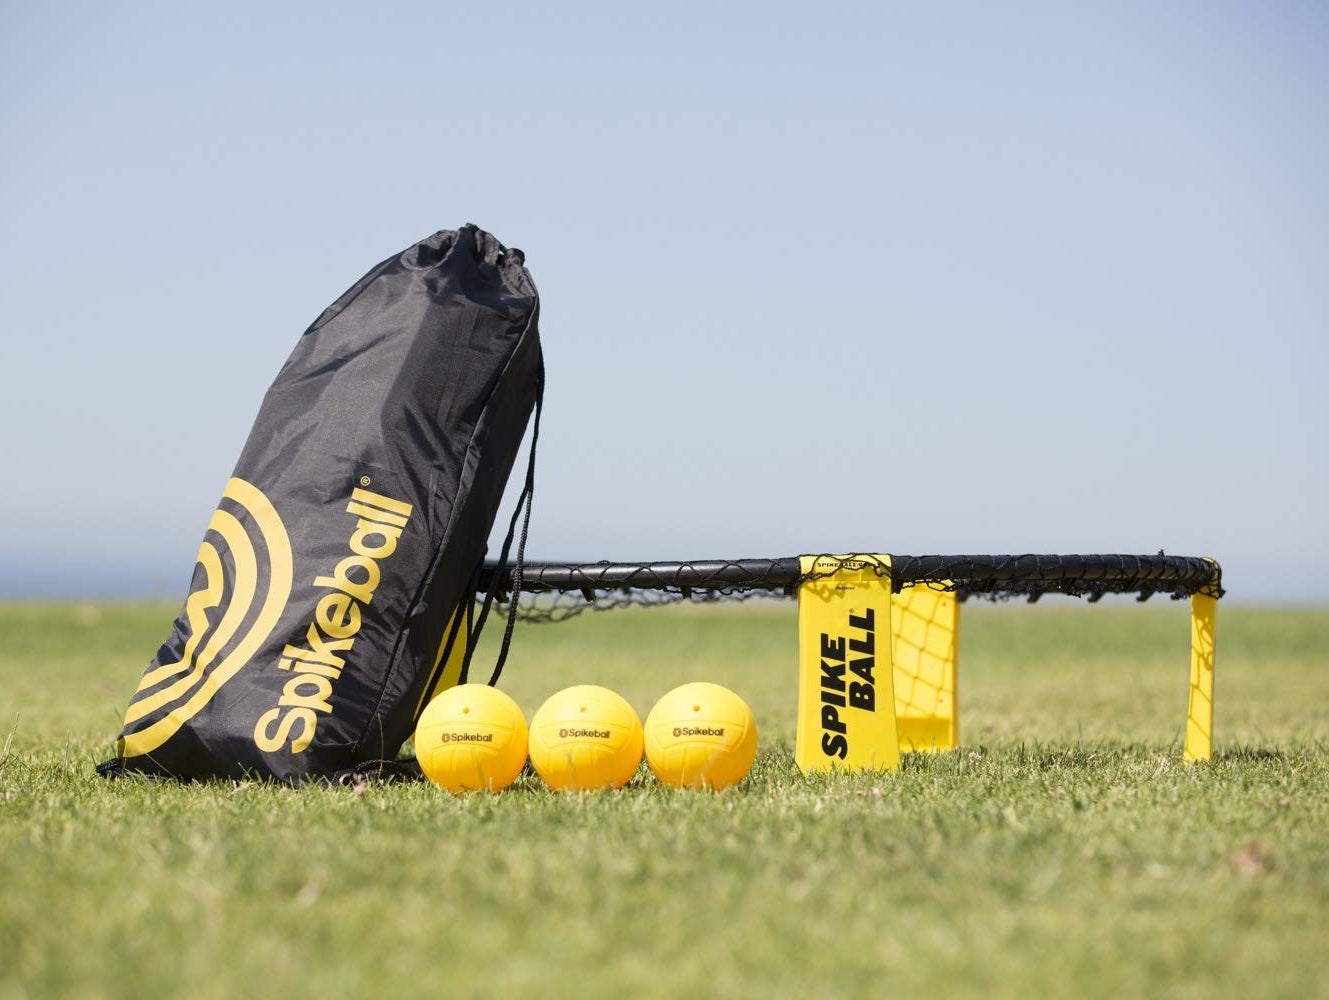 The spikeball balls, net, and carrying bag 